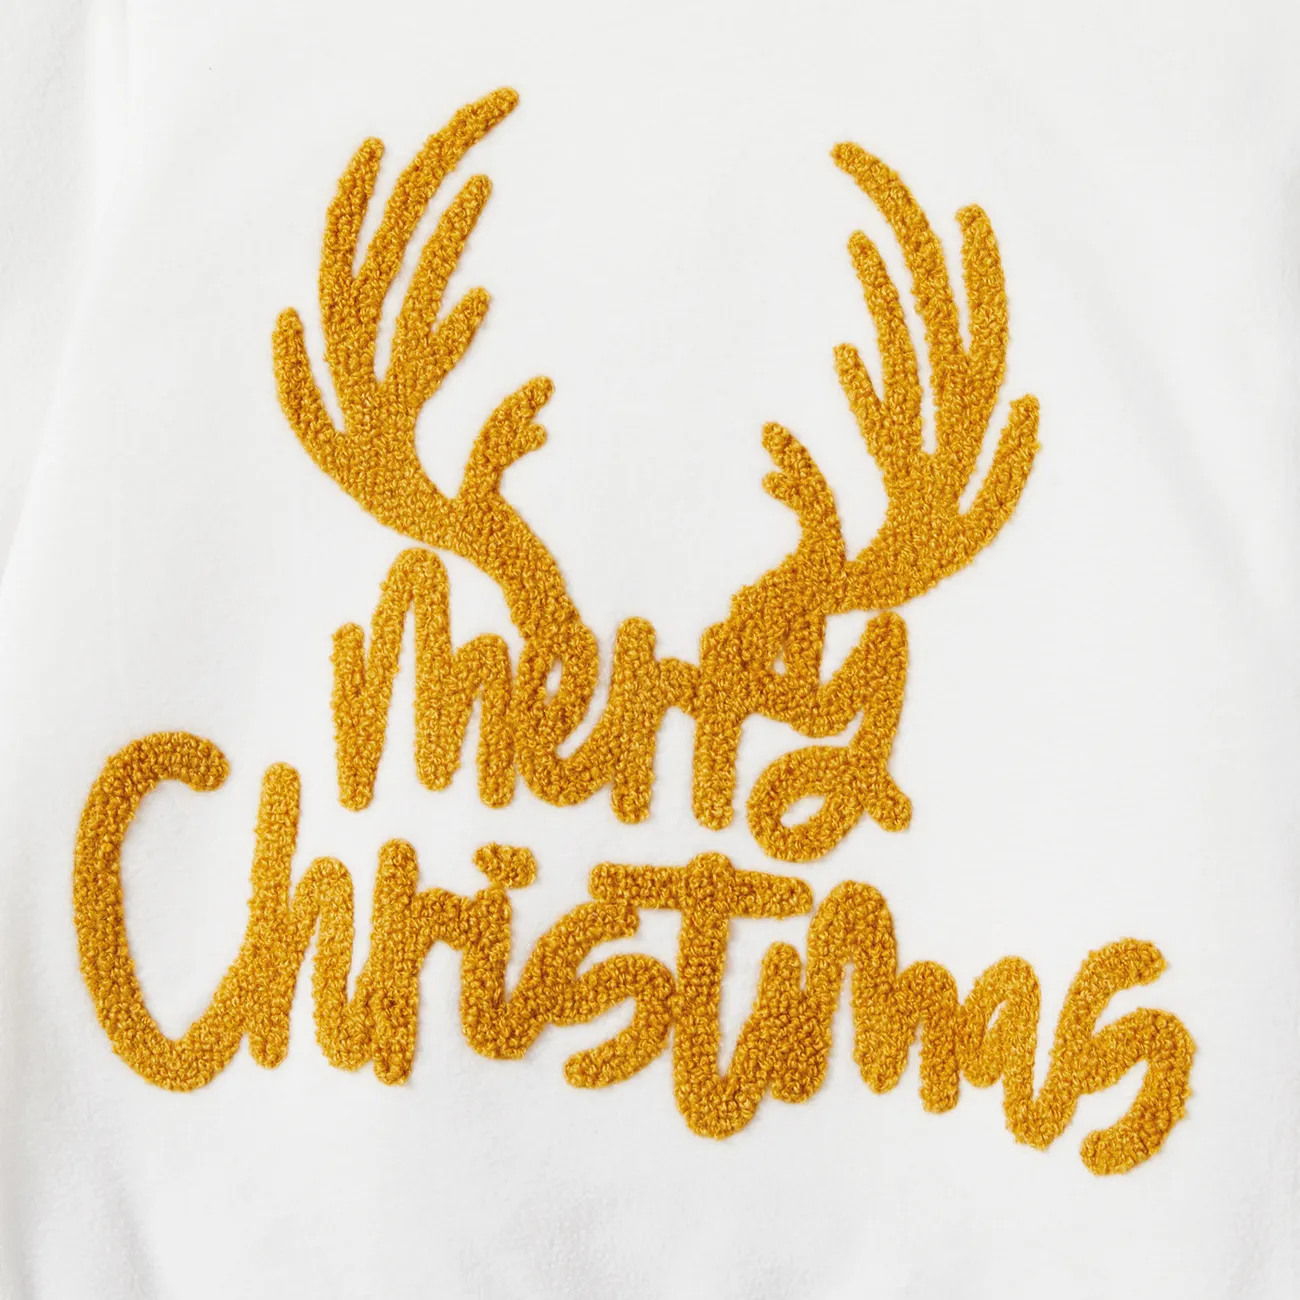 Christmas Family Matching Letters Embroidered Long-sleeve Hooded Fleece Pajamas Sets(Flame resistant) White big image 1